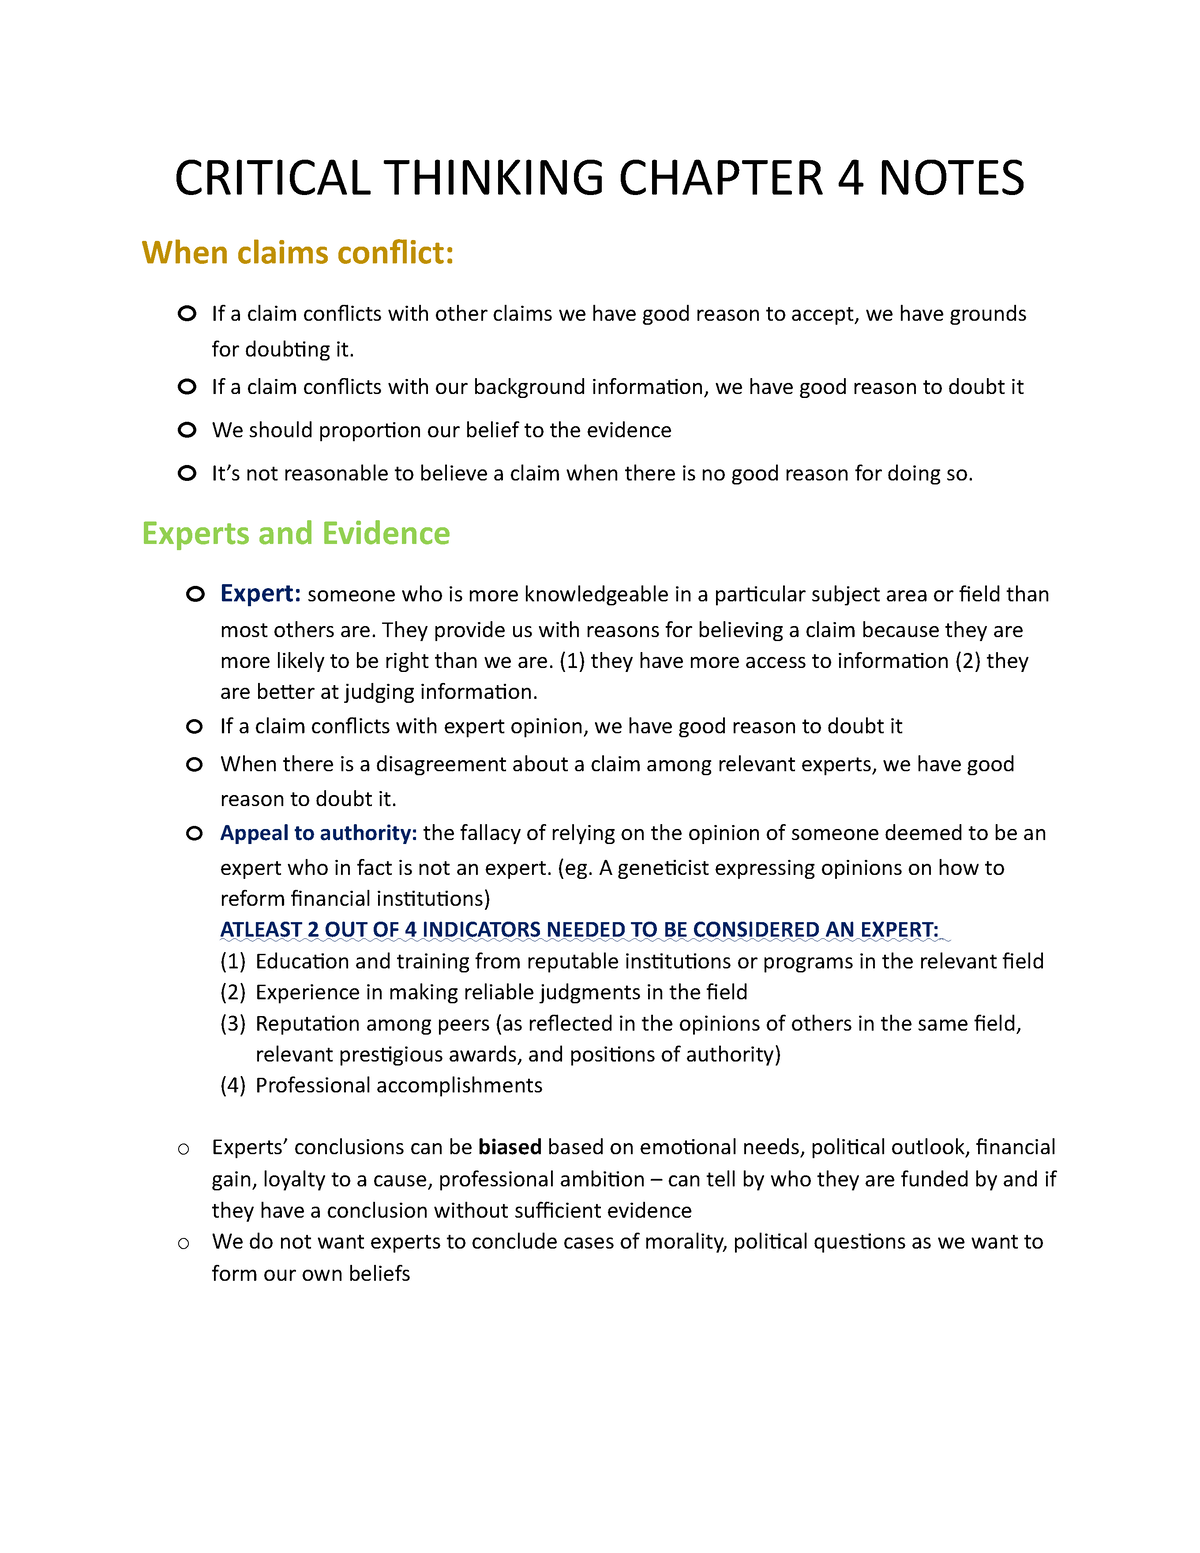 critical thinking chapter 4 exercise answers